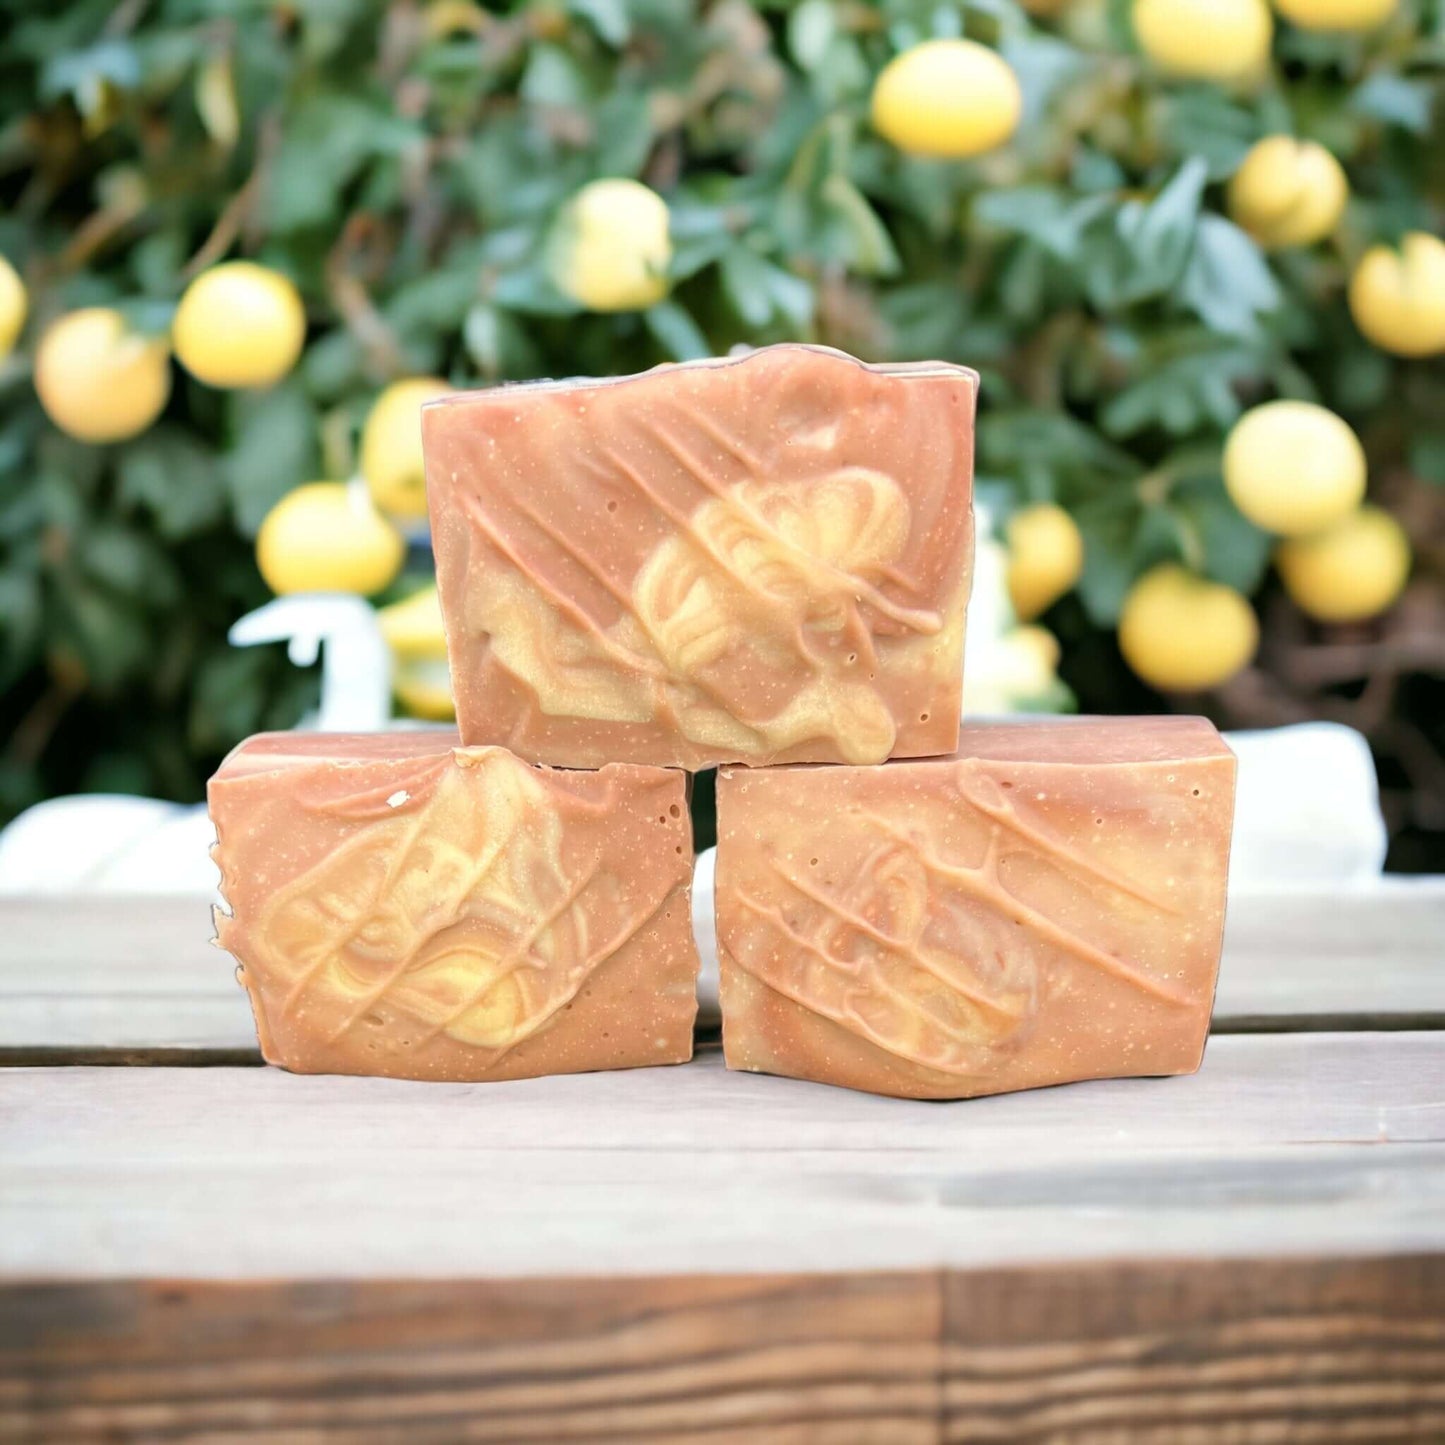 Artisanal citrus-infused tallow soap bars with detailed embossing, presented on a wooden table with lemon tree background